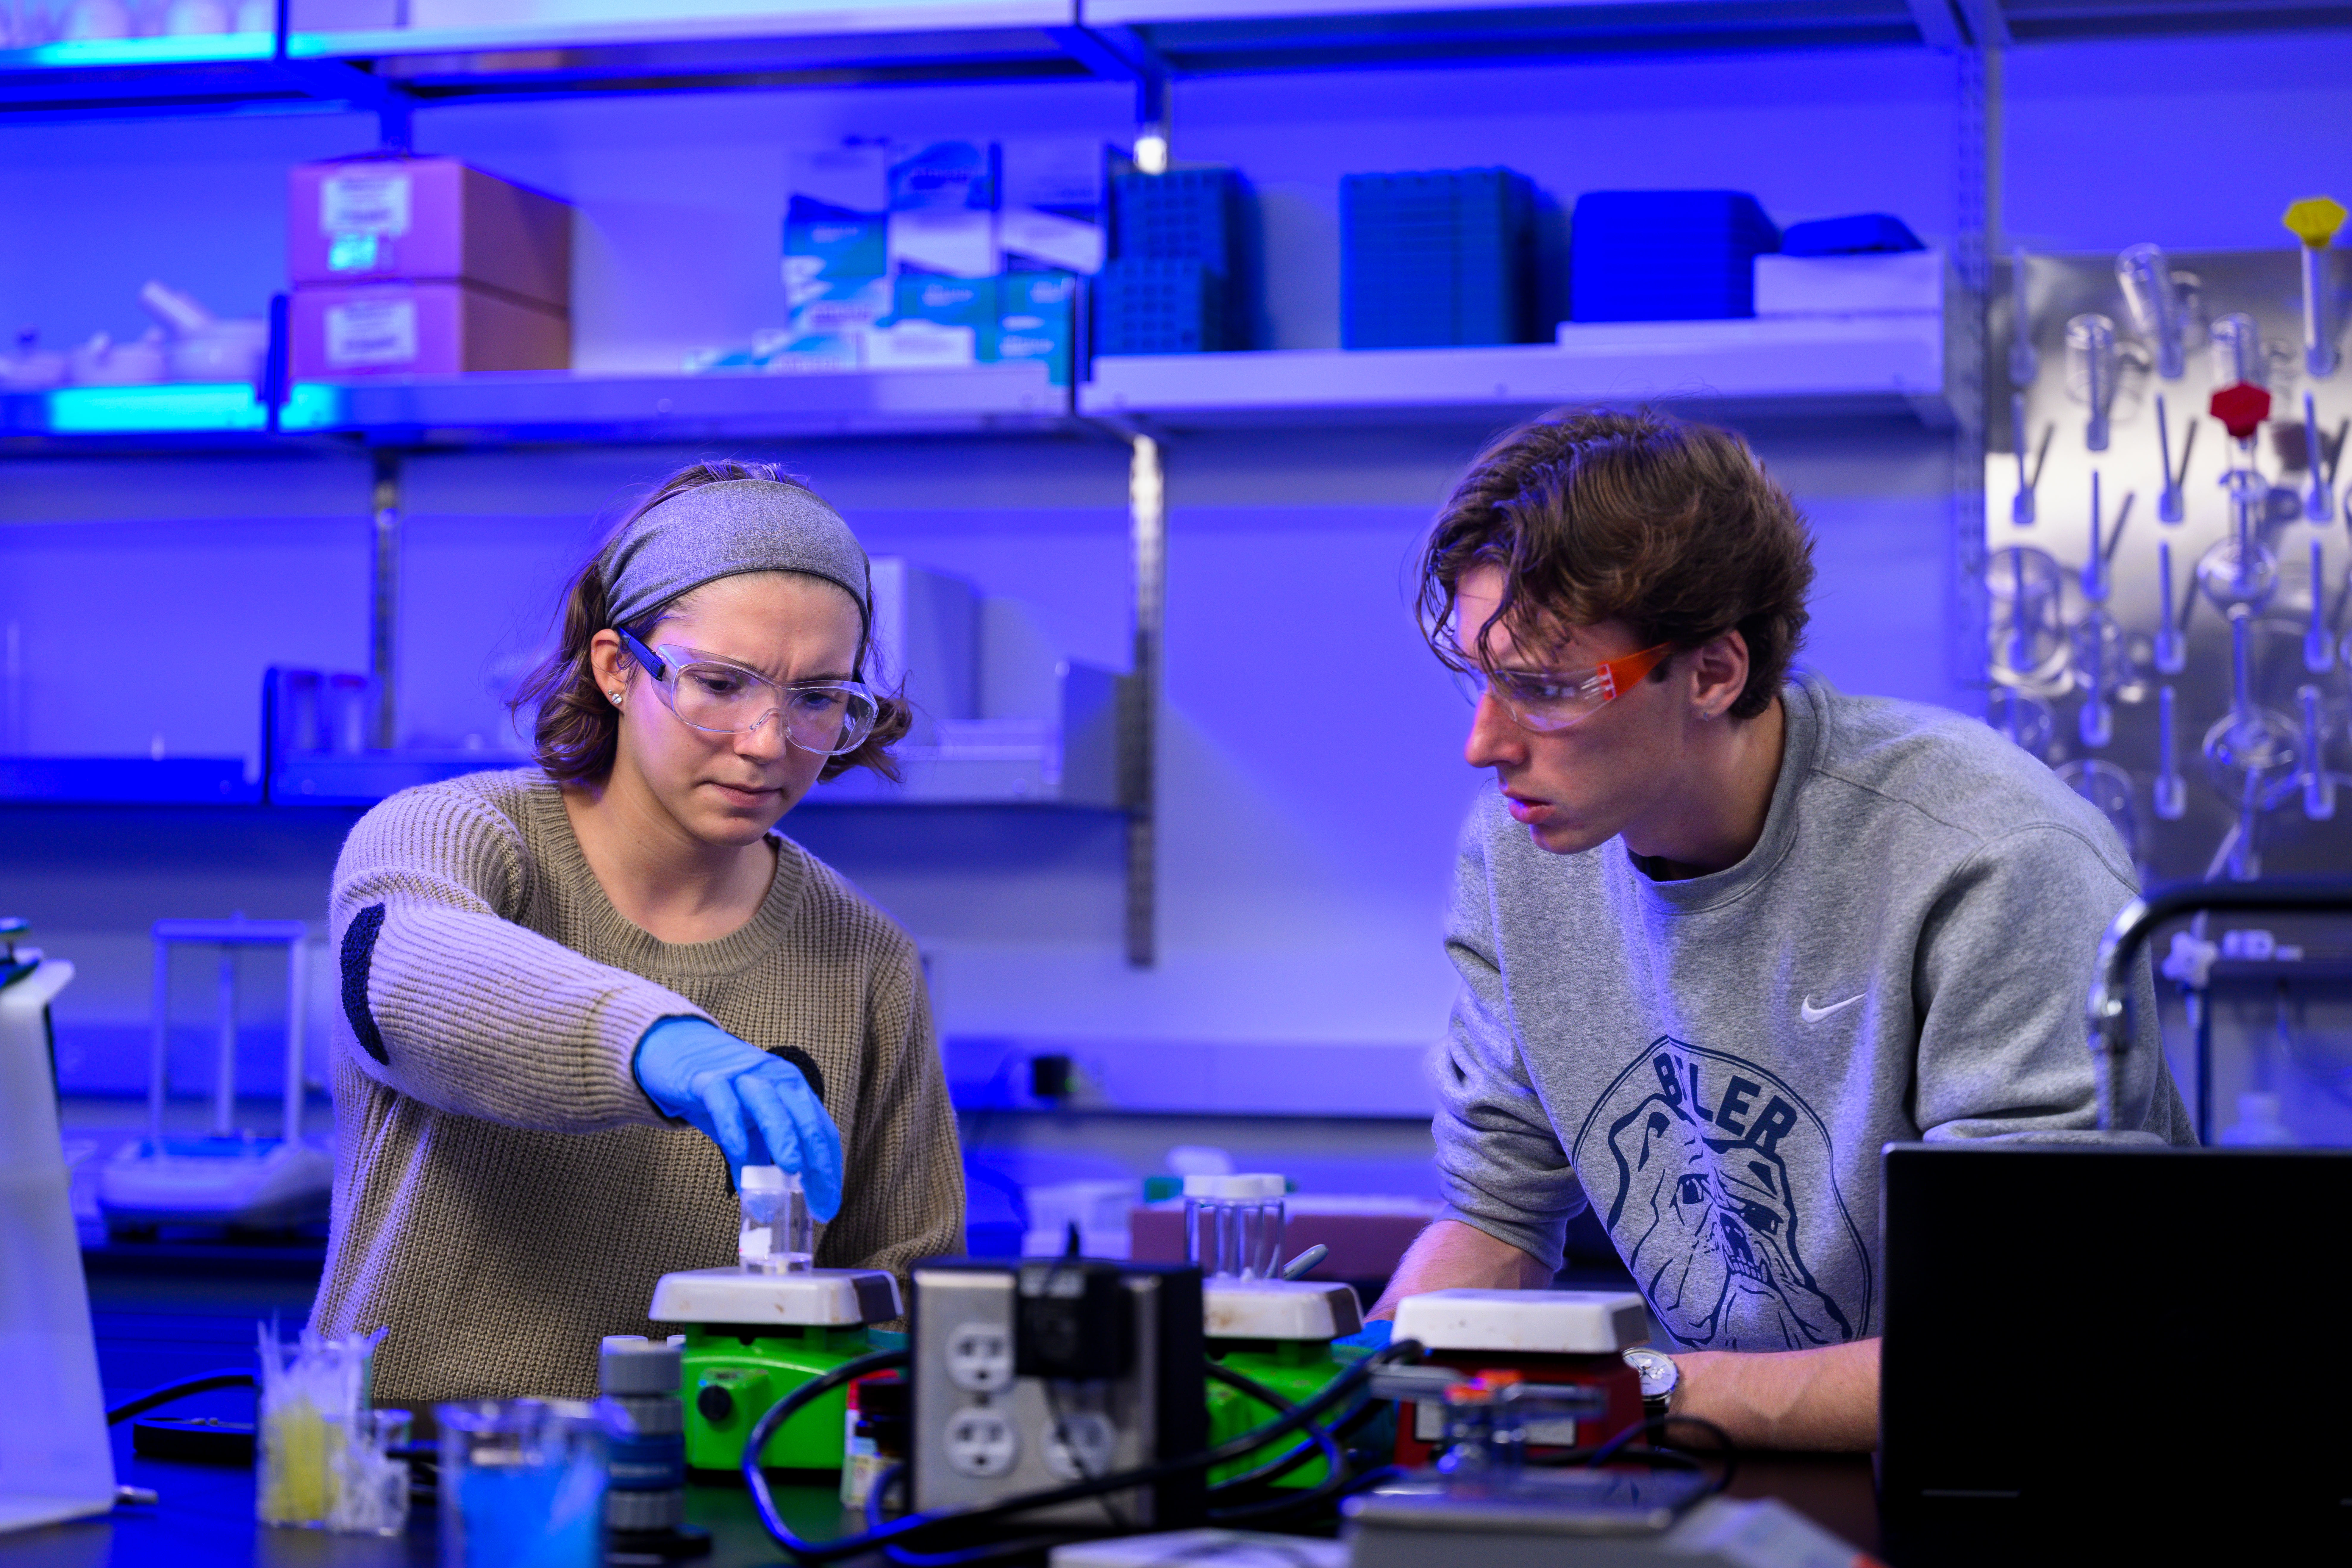 Image of two Butler students in science lab